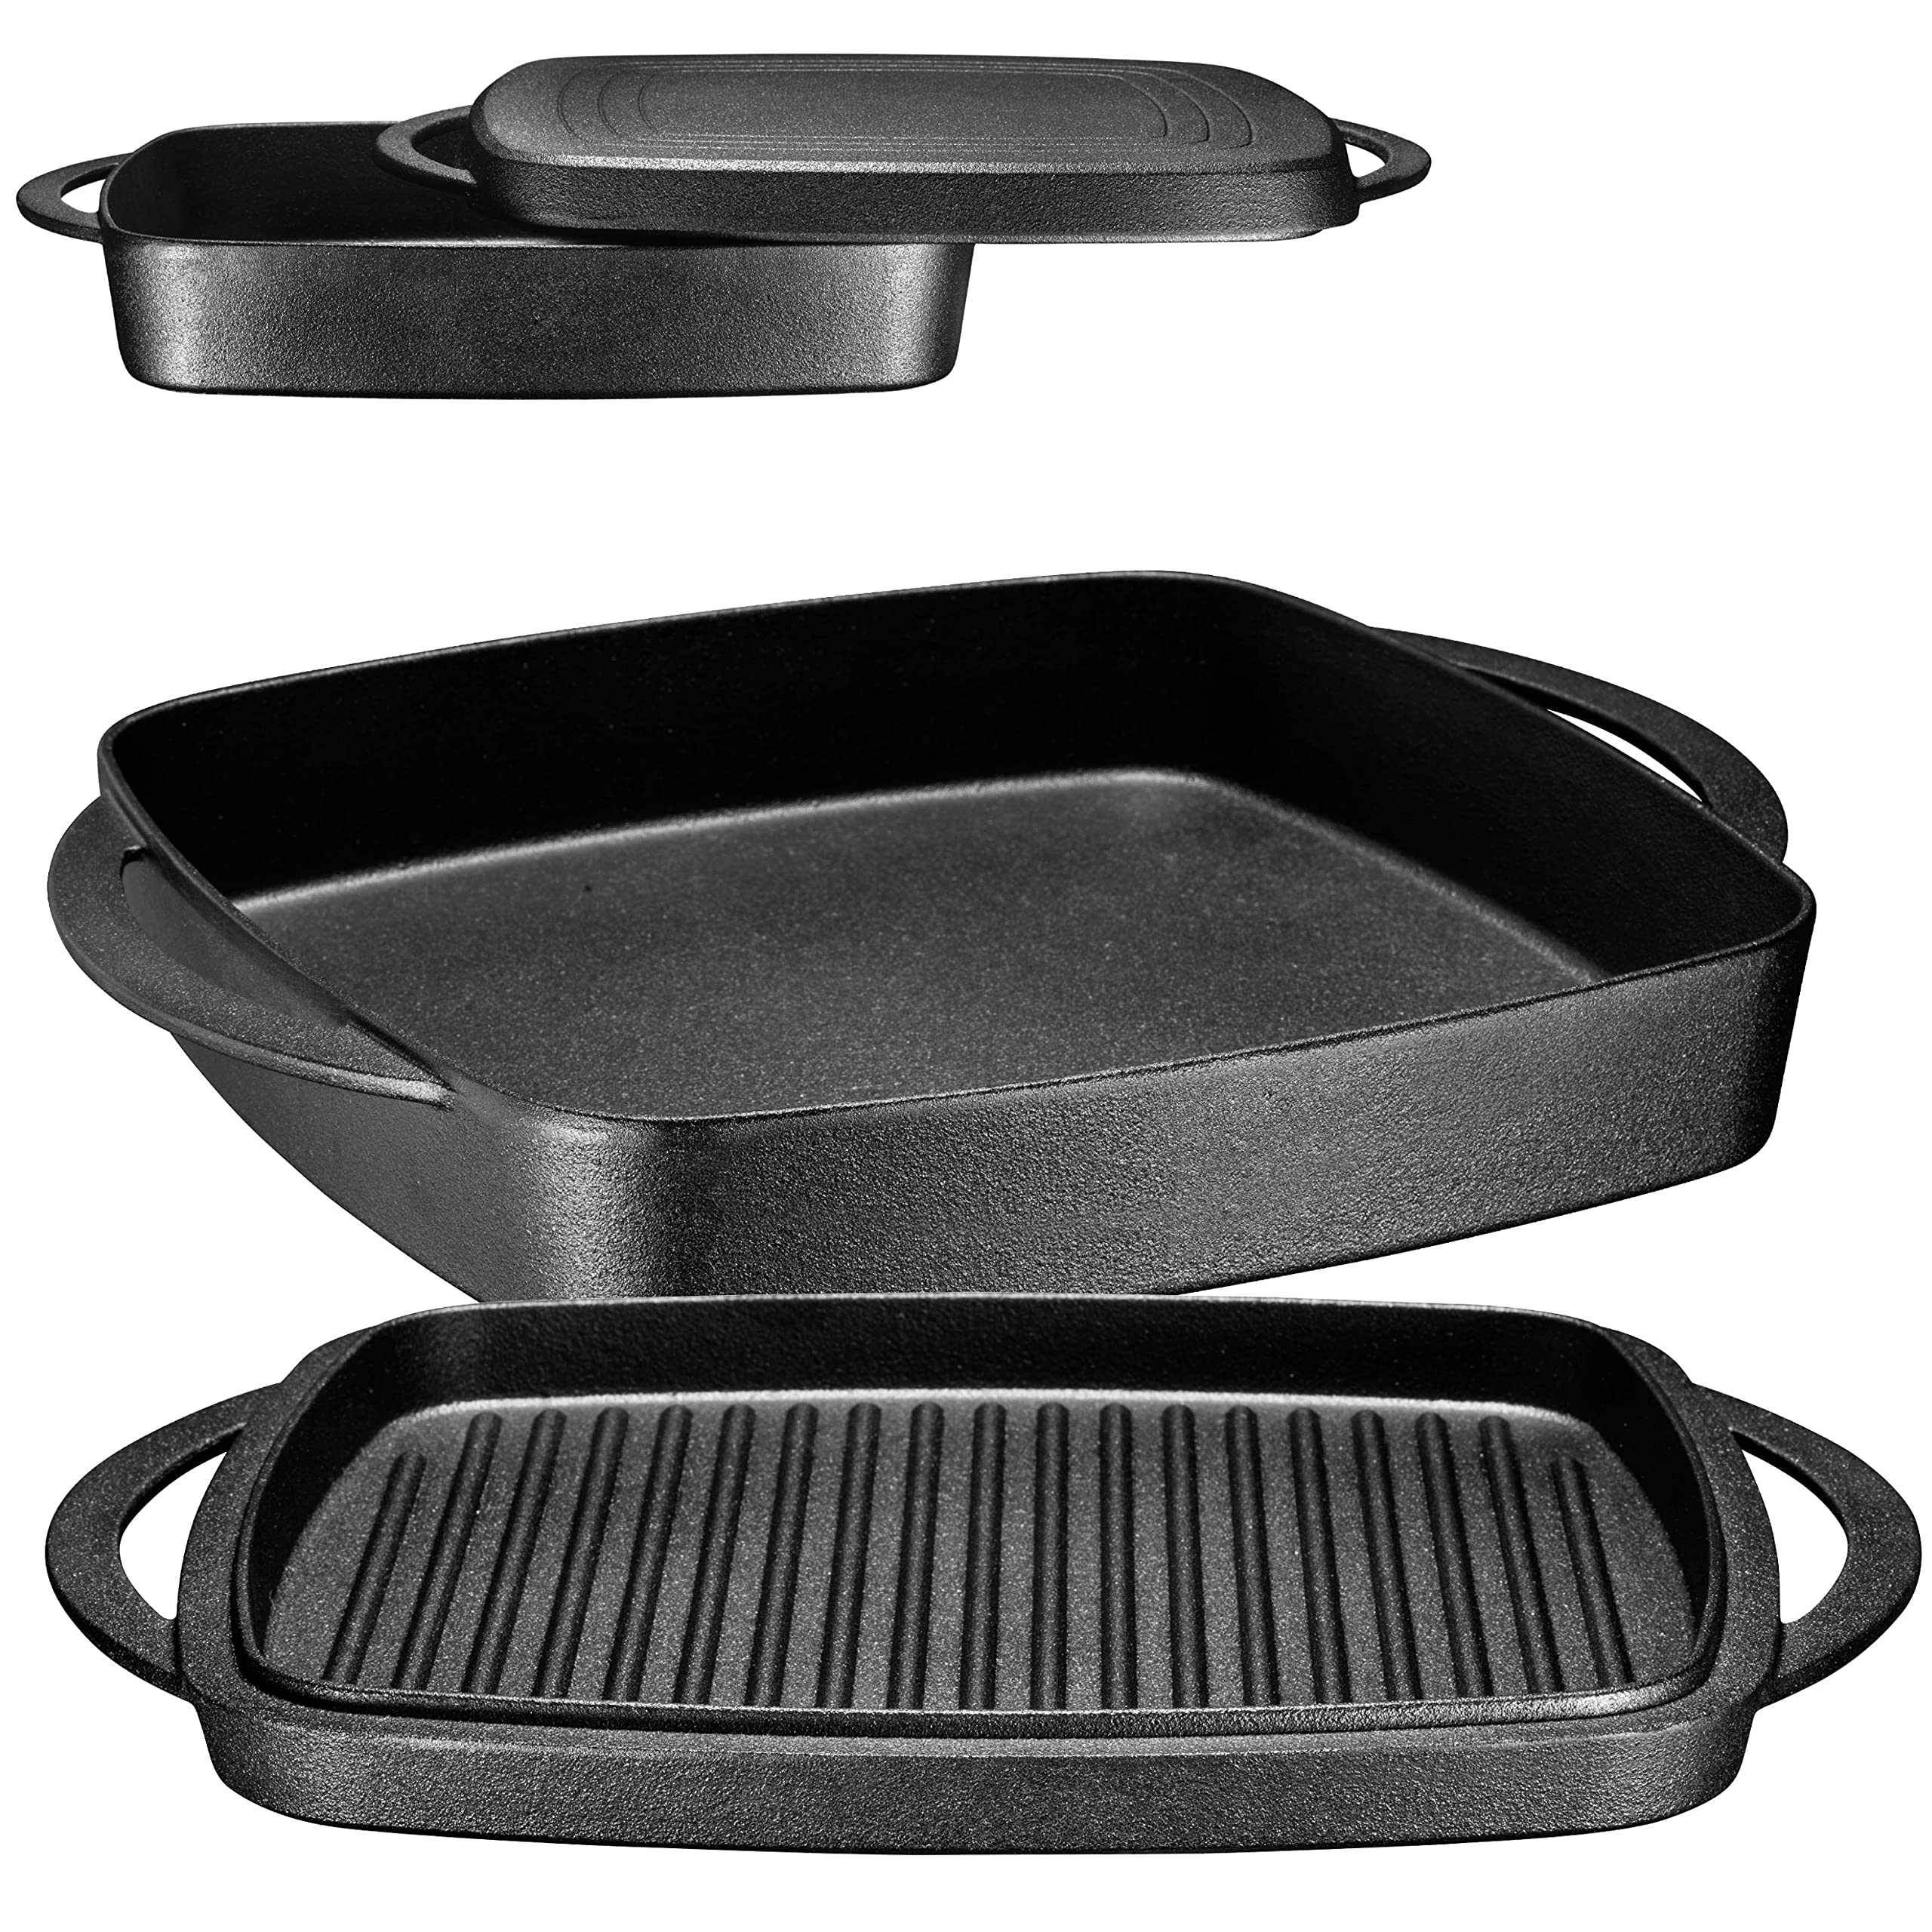 Bruntmor 2-in-1 Pre-seasoned Square Cast Iron Dutch Oven With Dual Handles, Non stick Pan with Grill, Casserole Dish with Lid for Braising Dishes, Crock Pot Covered With Cast Iron, Oven Safe Skillet